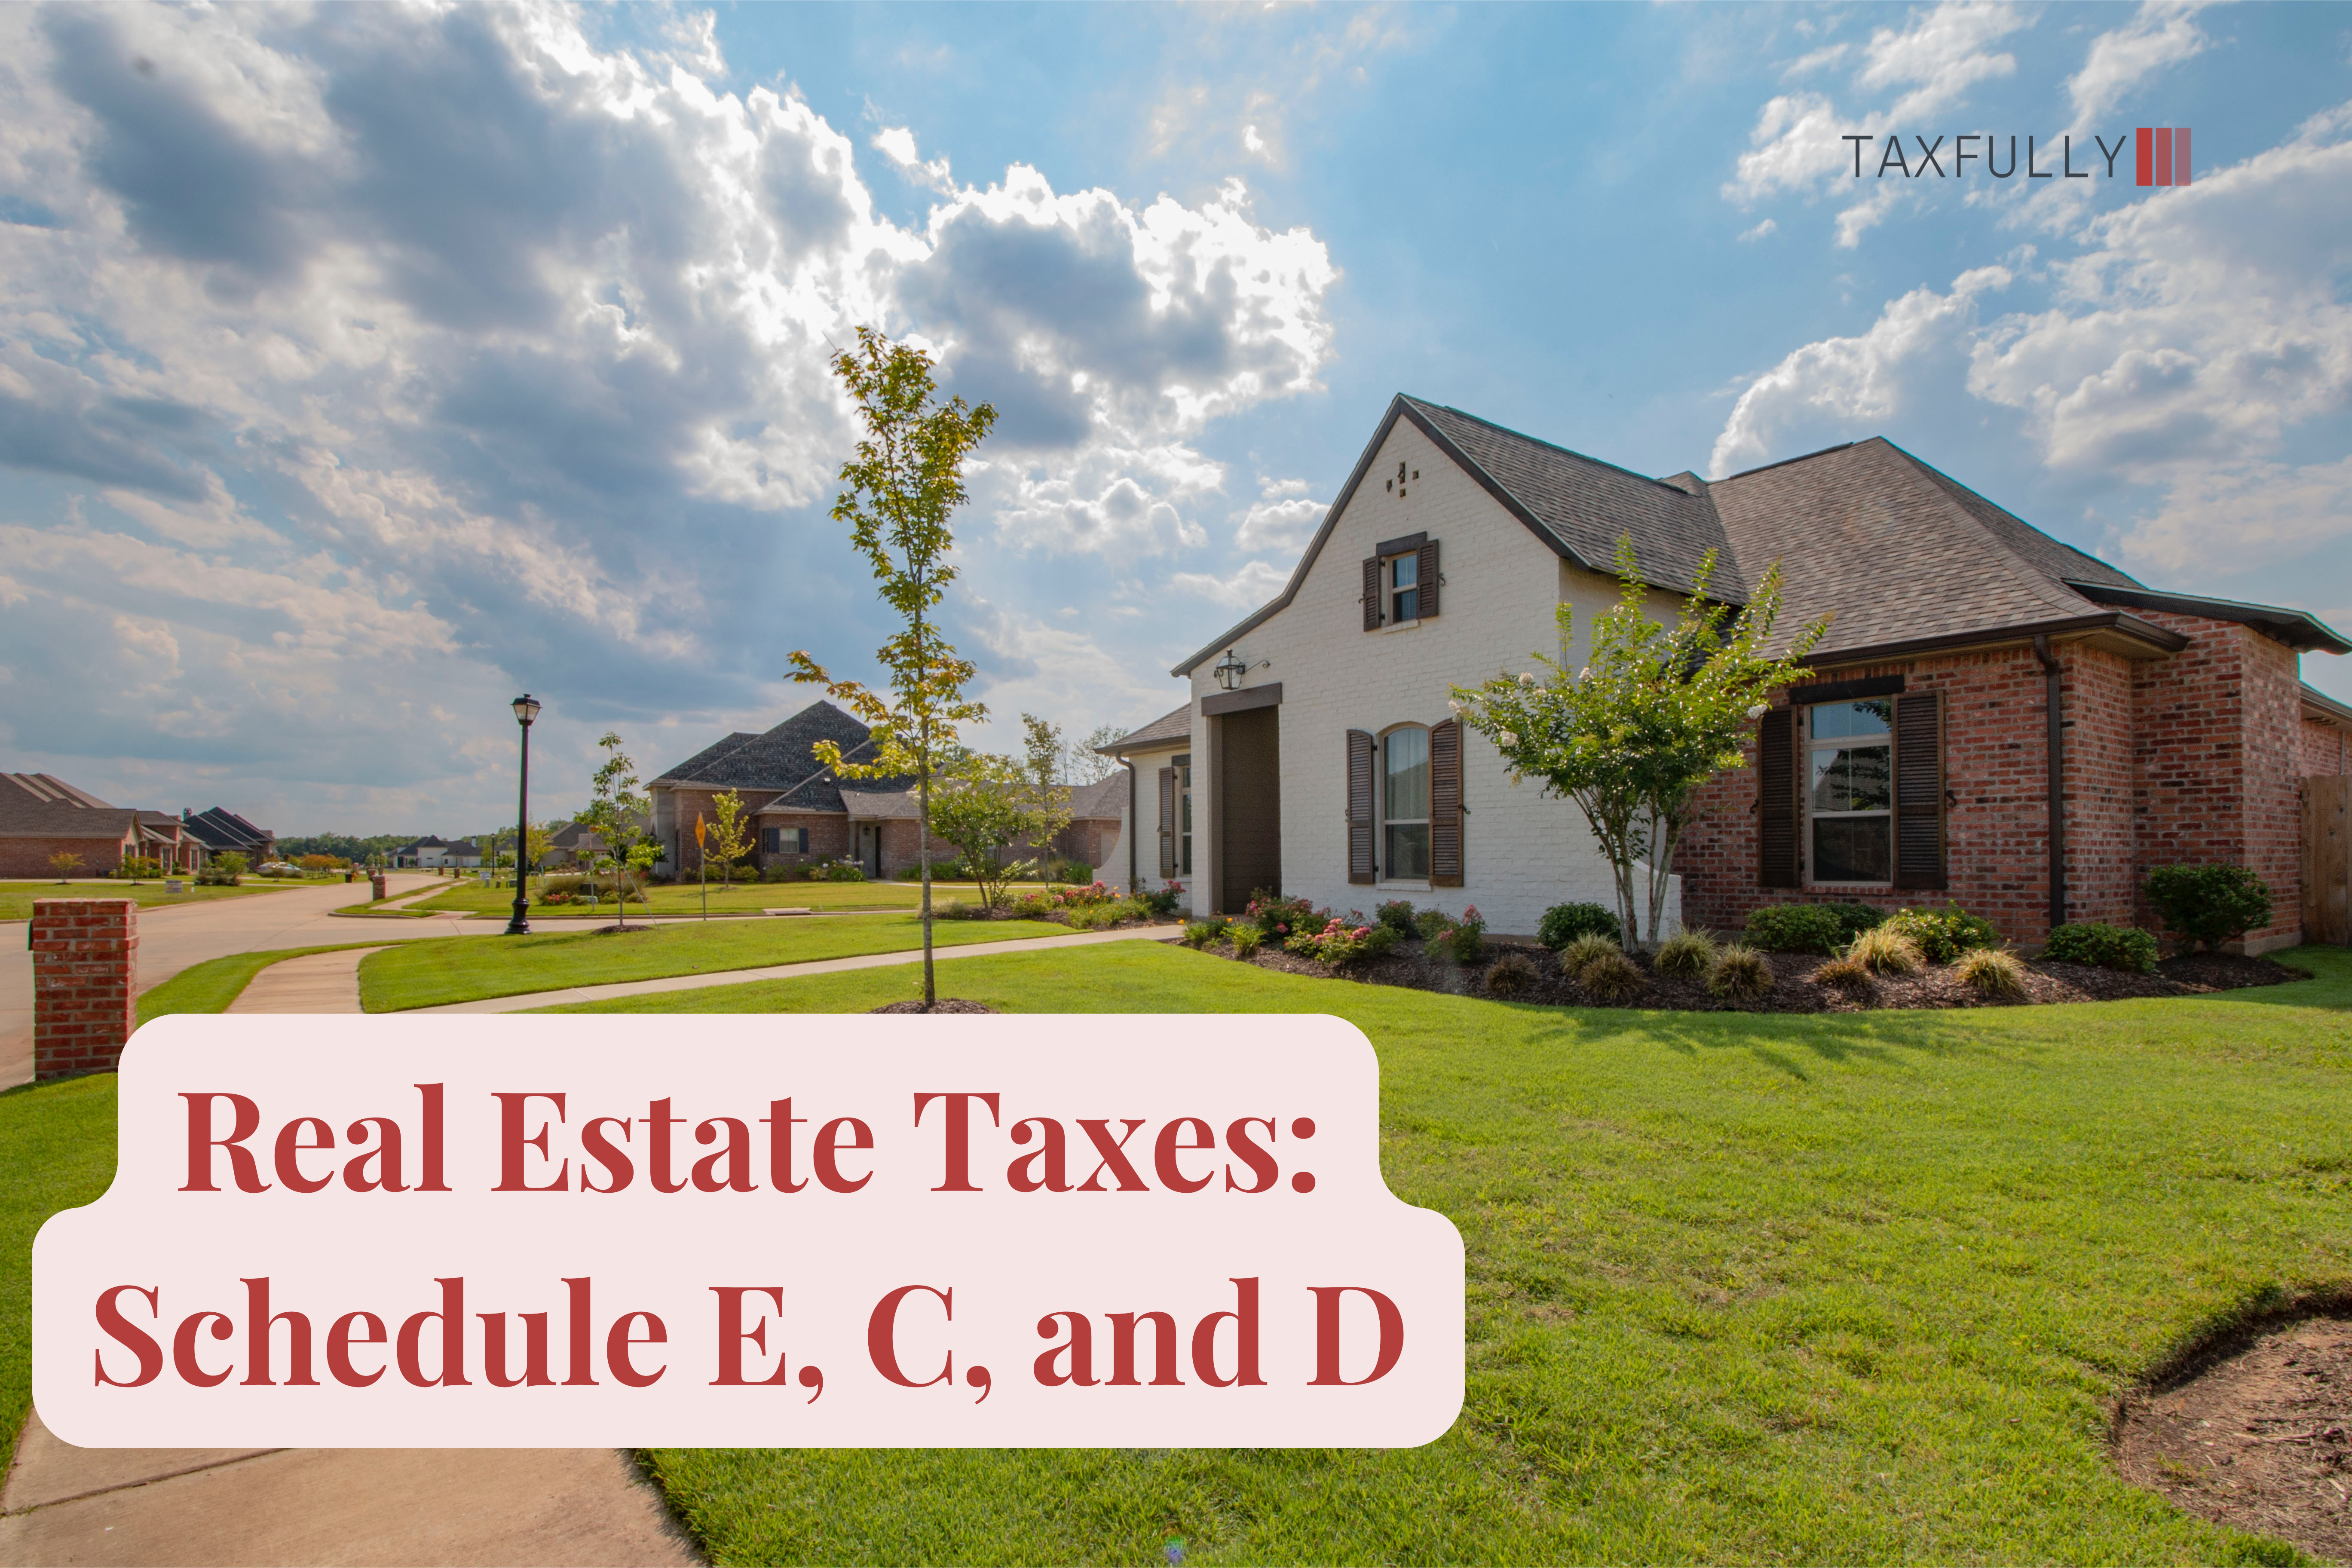 You are currently viewing Real Estate Taxes: Schedule E, C, and D